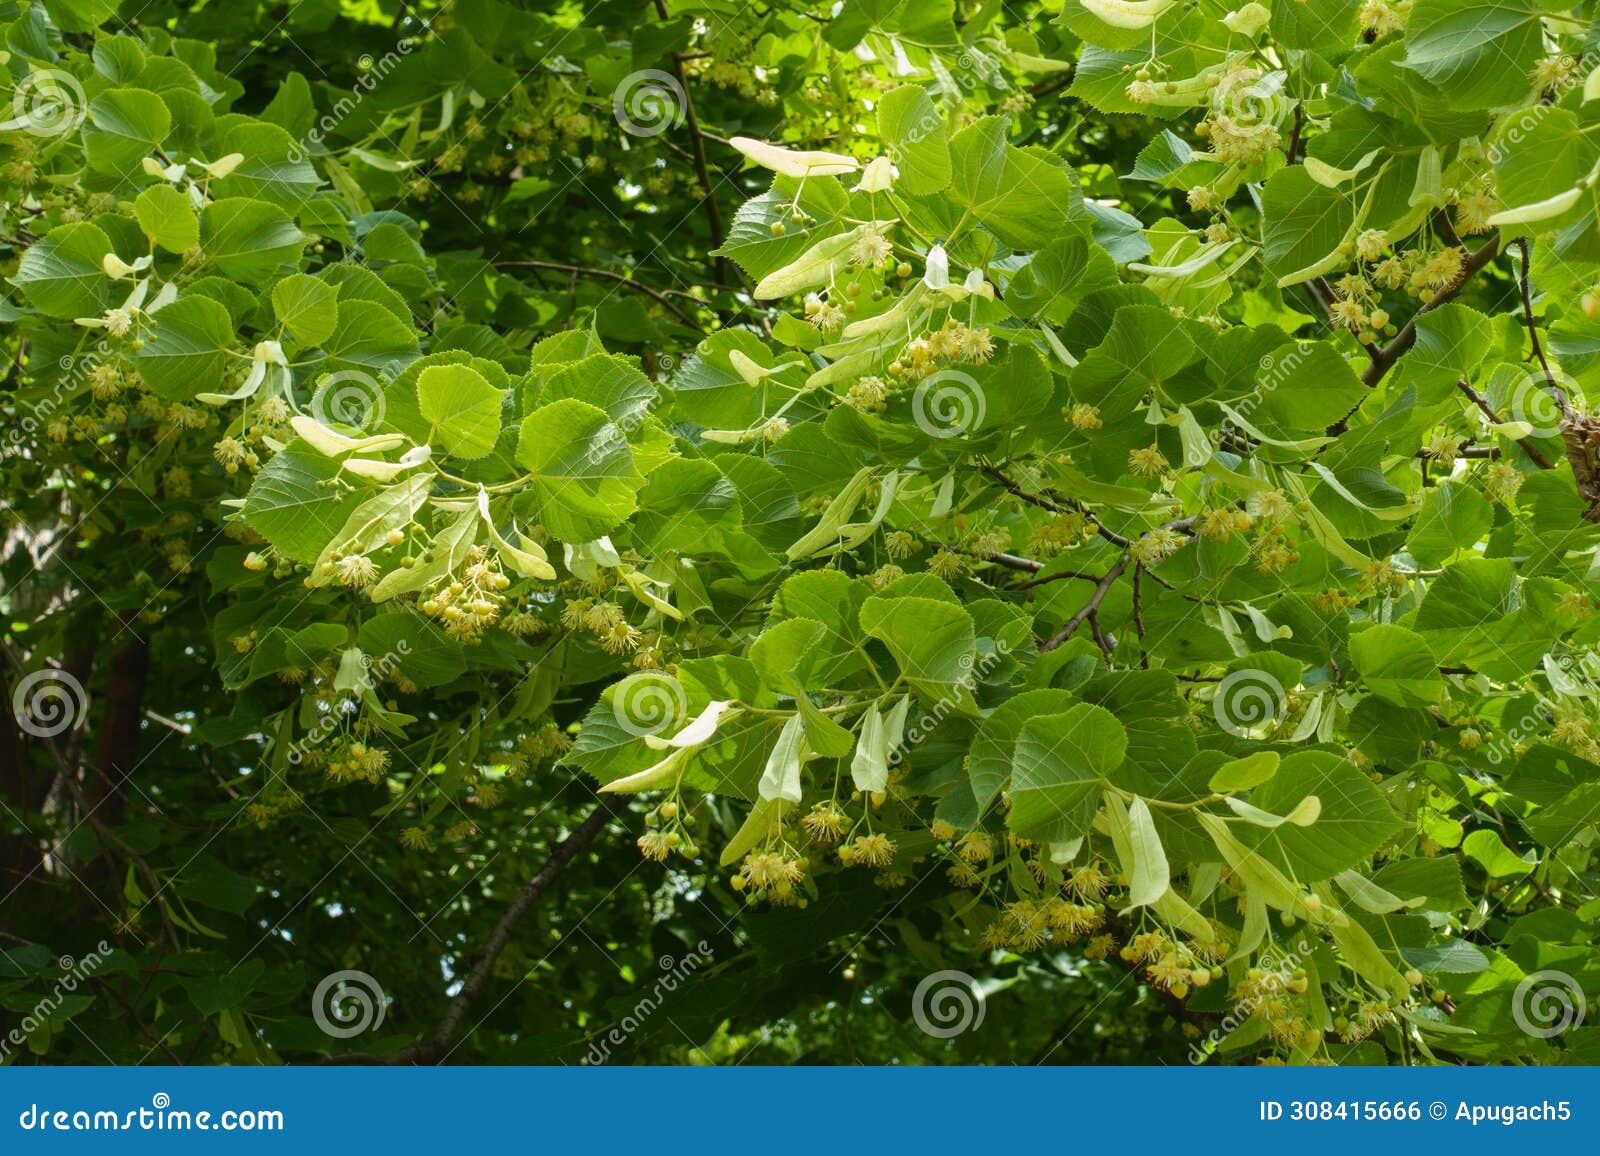 a ton of flowers in the leafage of linden tree in june